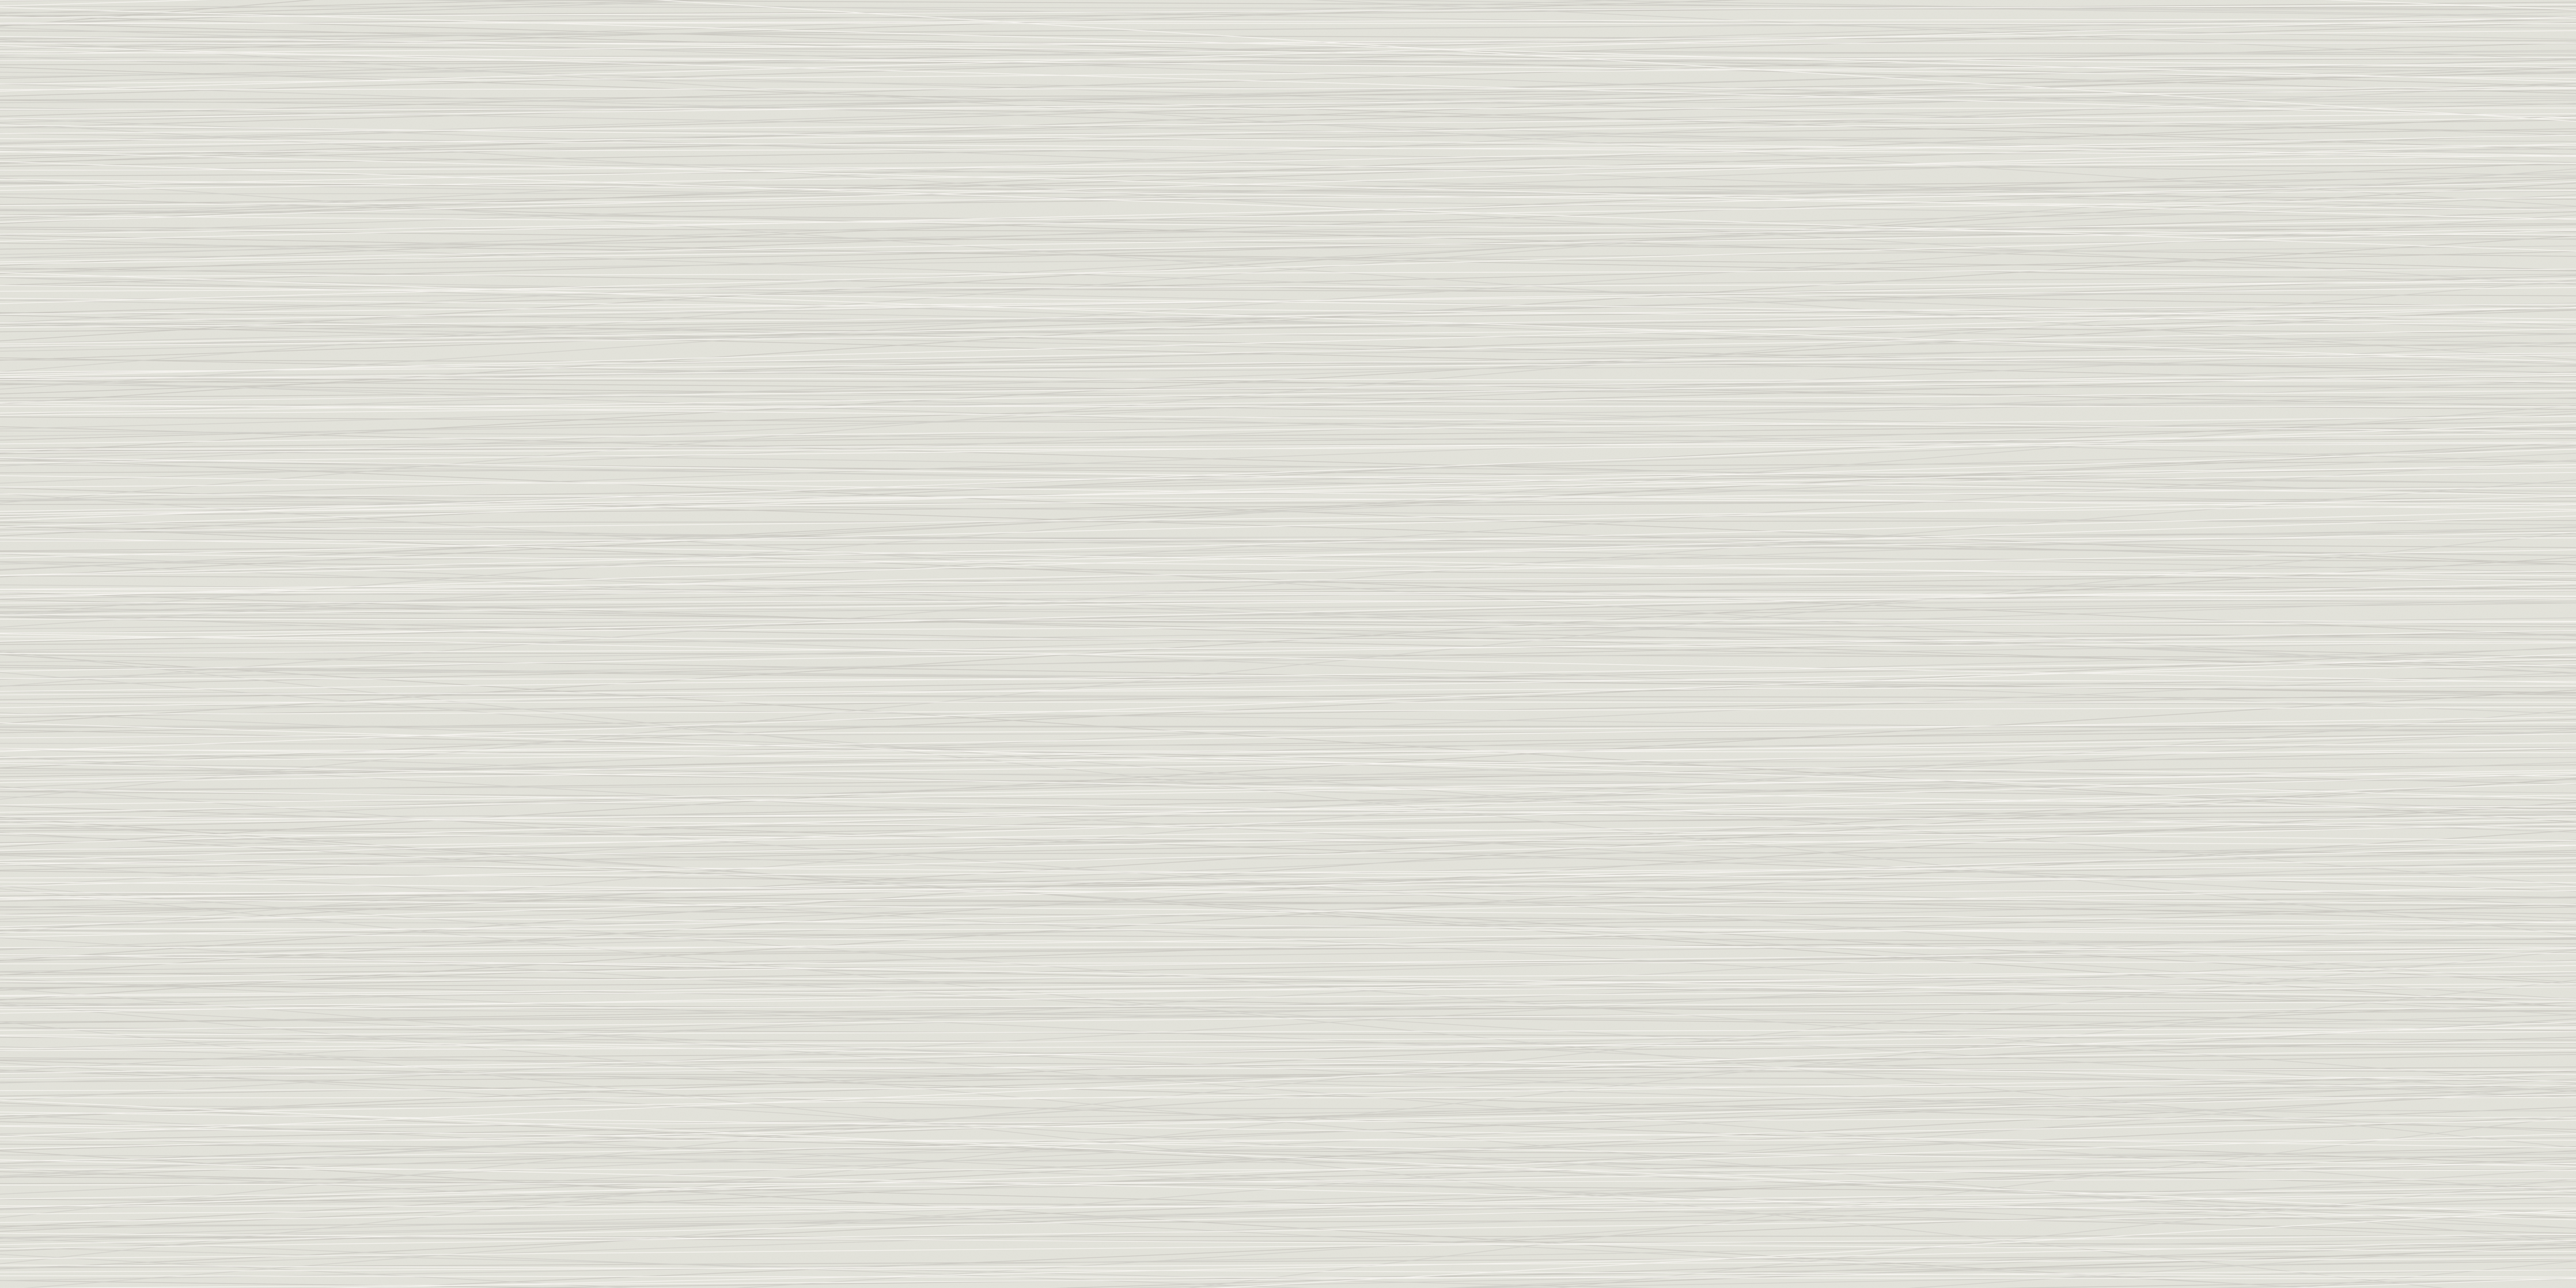 bianco pattern color body porcelain field tile from zera annex anatolia collection distributed by surface group international matte finish rectified edge 12x24 rectangle shape